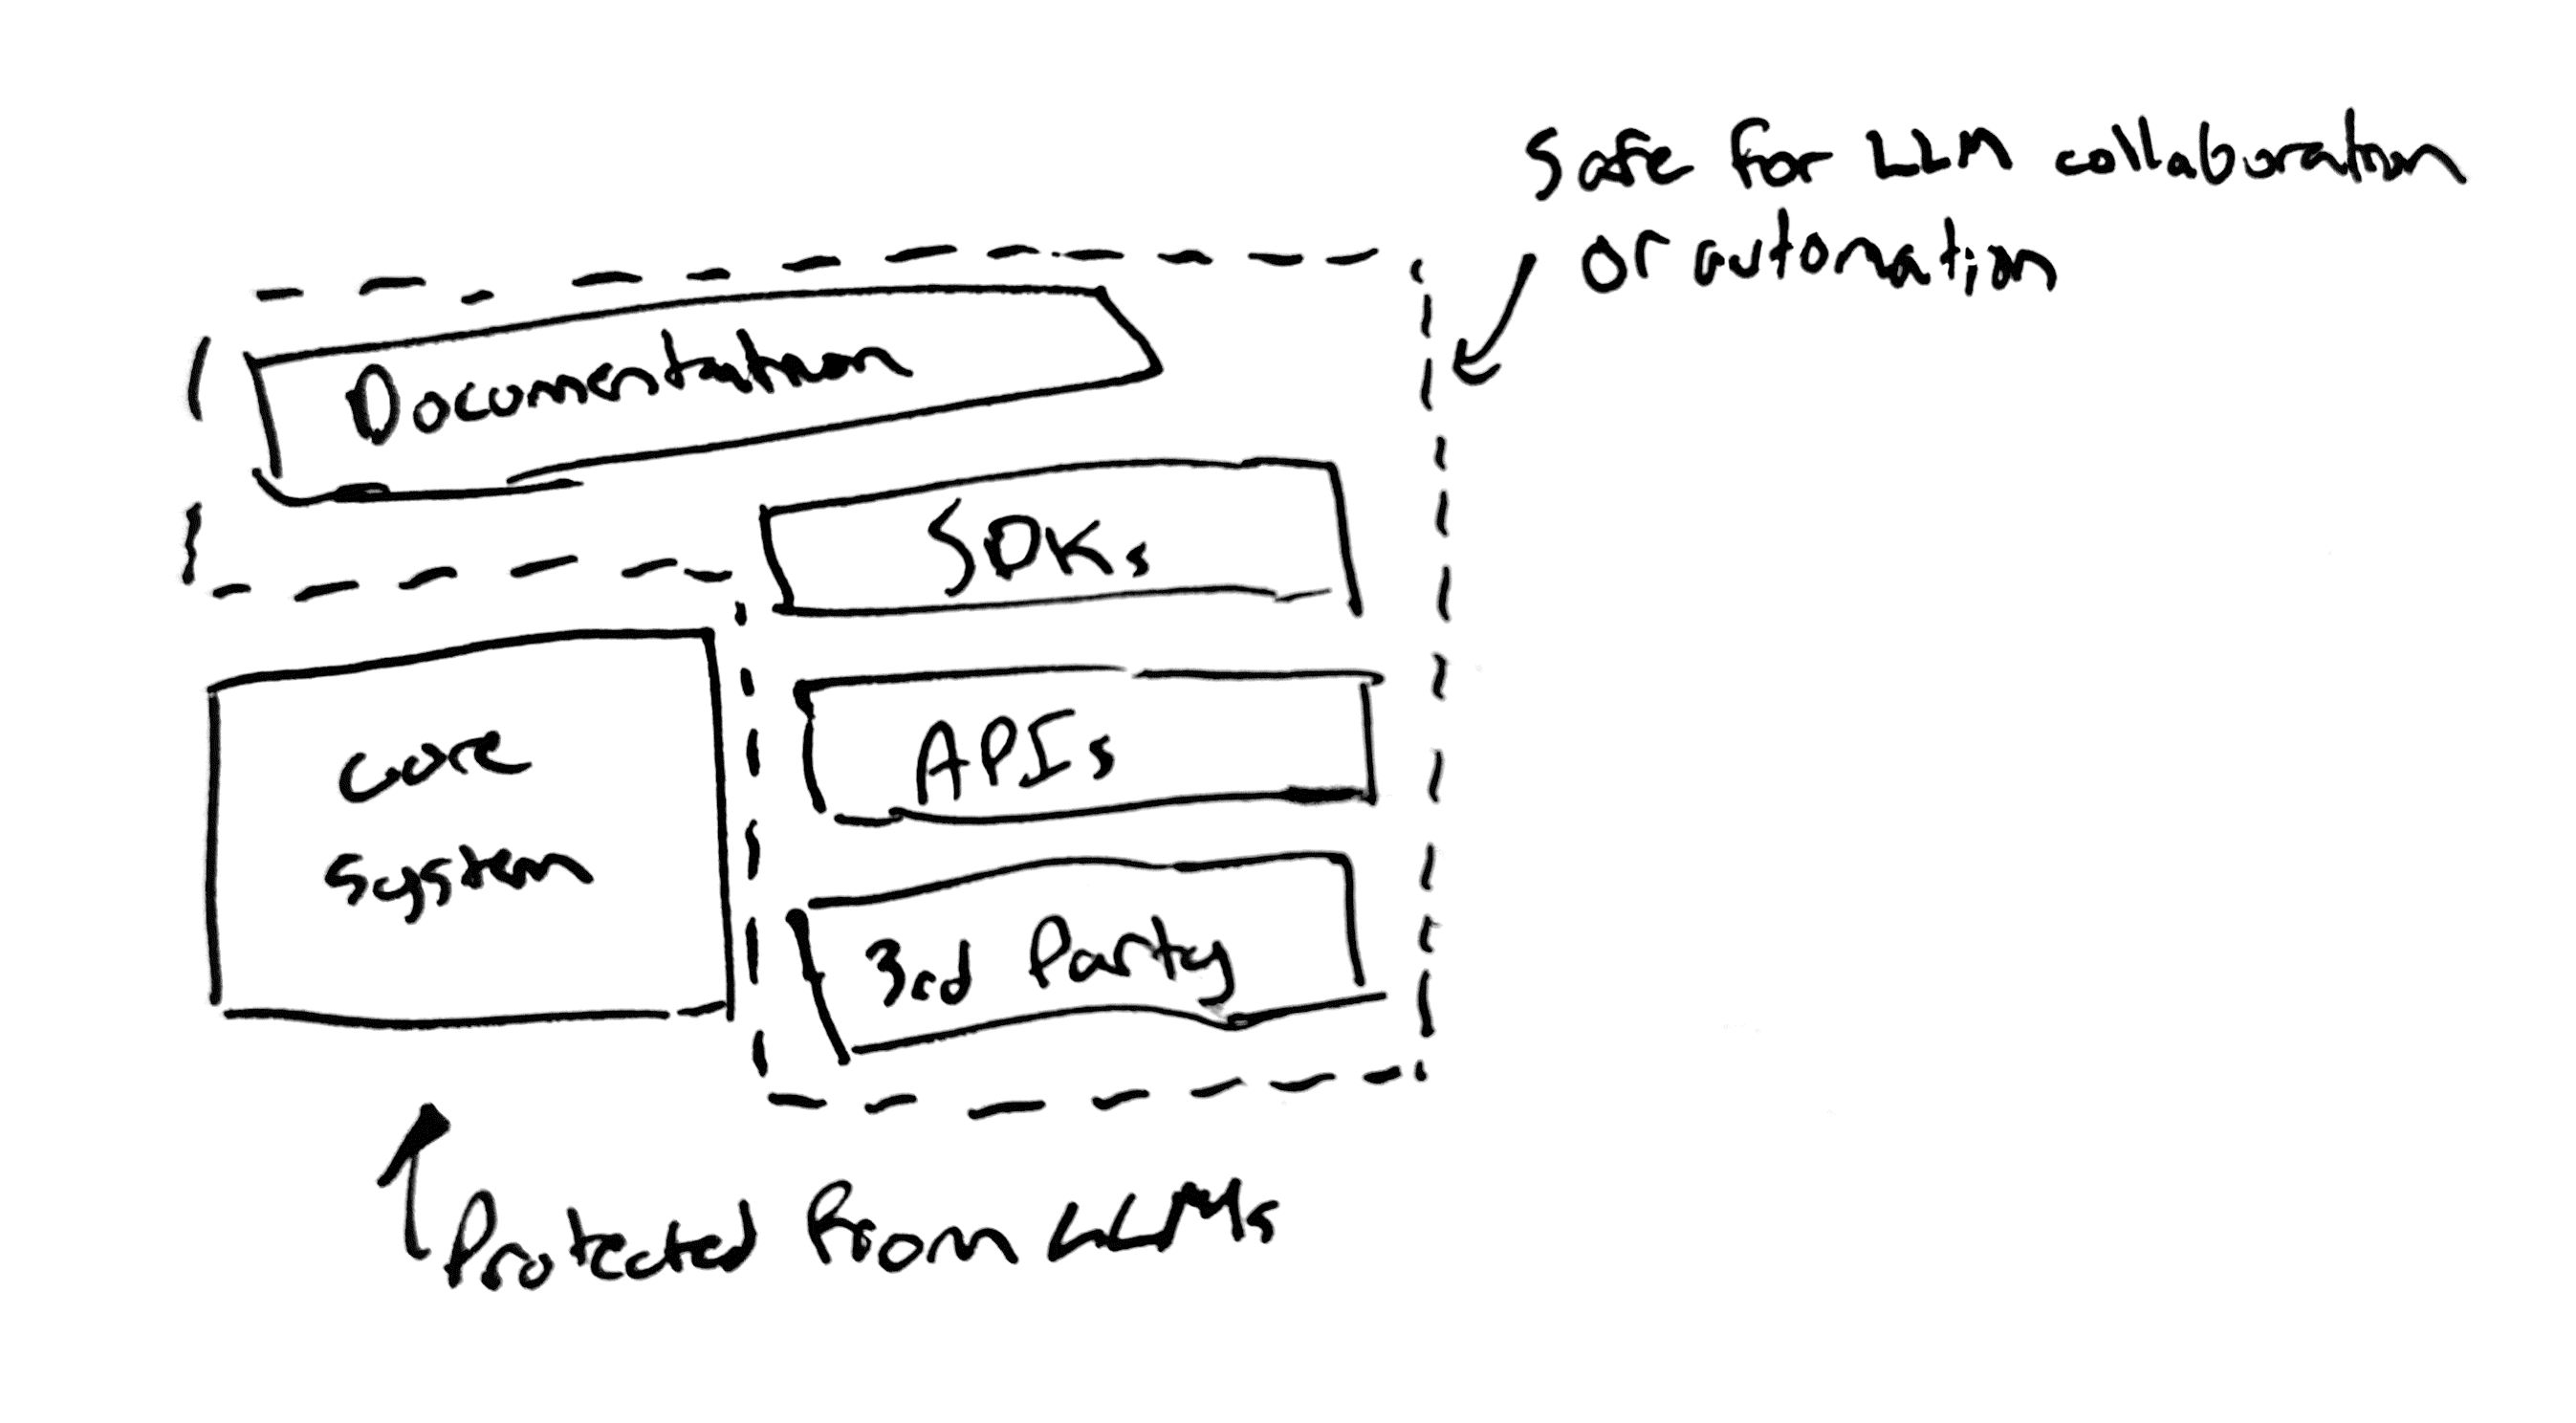 A comic that shows various areas of a software system, core, API, SDK, 3rd party, and dashed lines around everything but the core area. The dashed line is labeled with 'safe for llm collaboration'. The rest of the area is labeled with 'limits on llm collaboration'